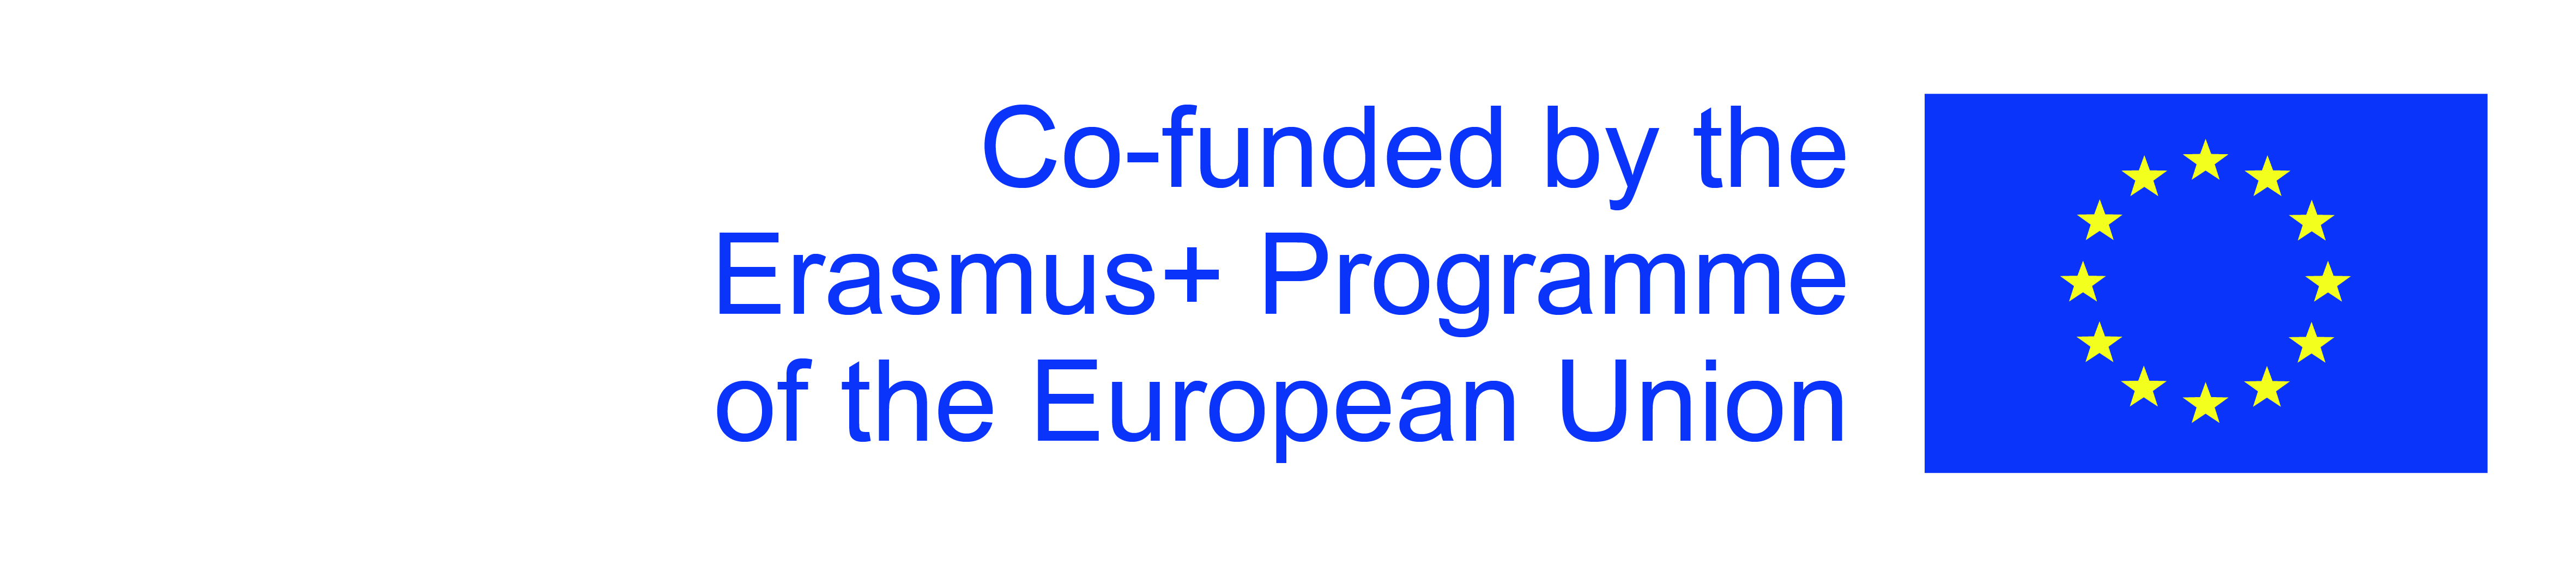 Co funded by the Erasmus+ Programme of the European Union